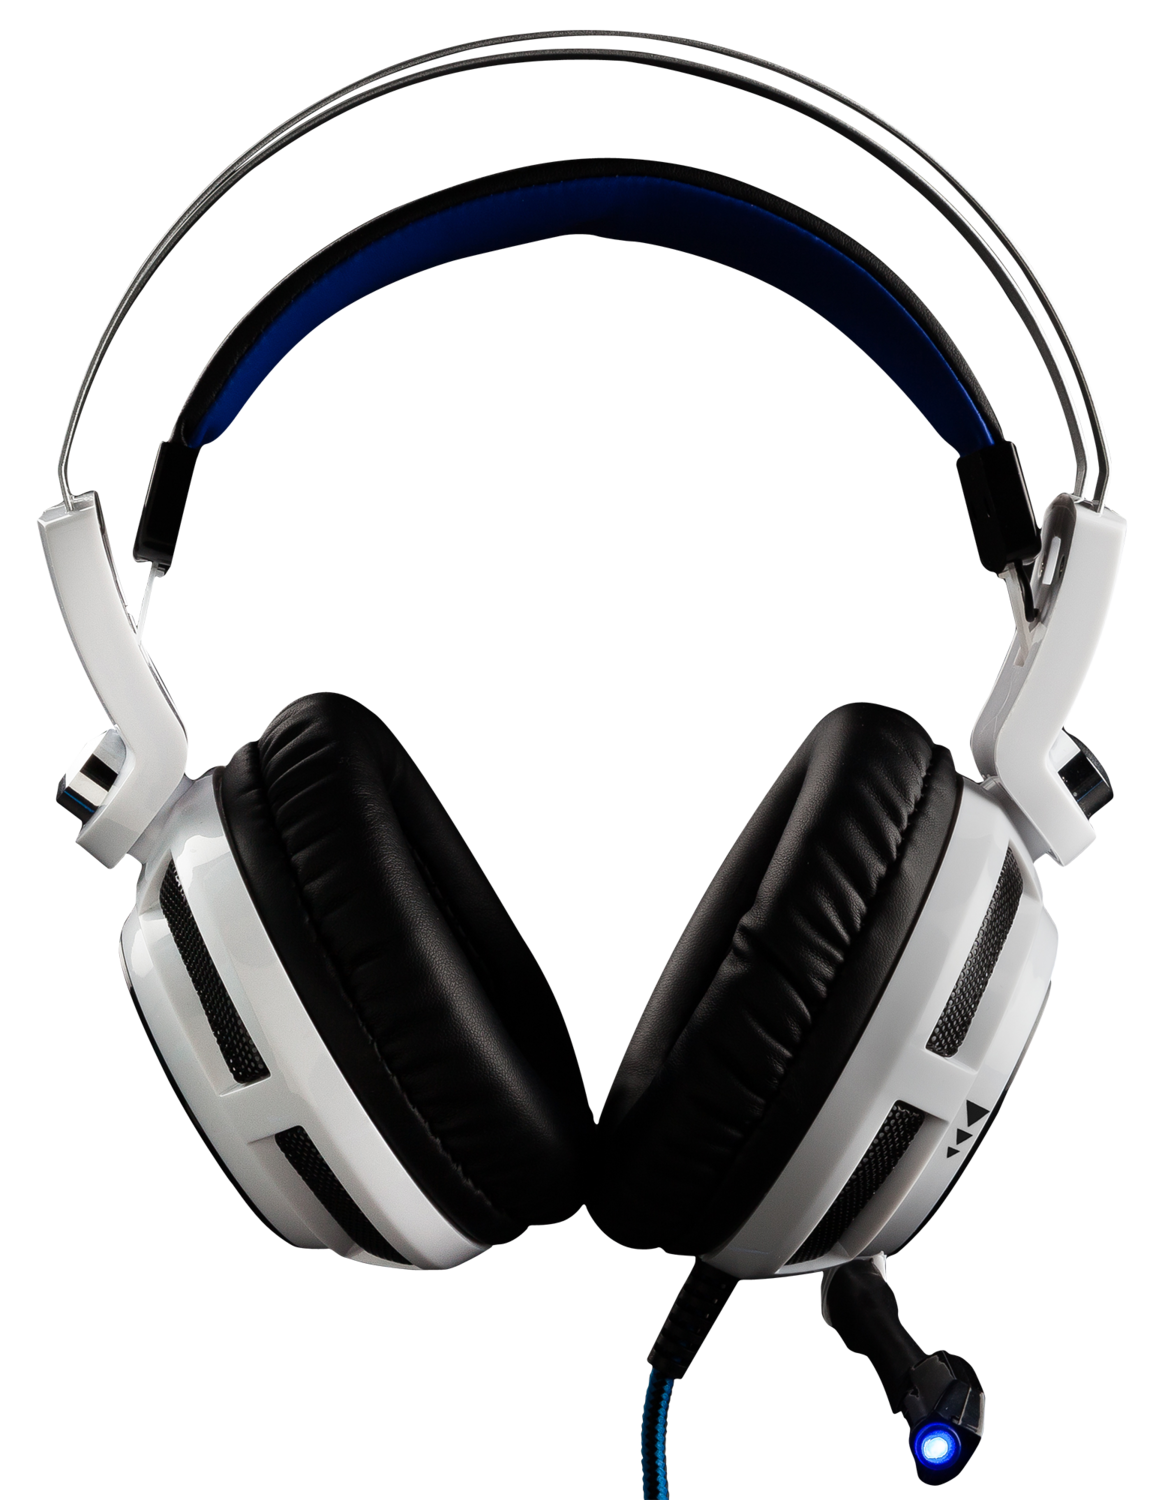 Casque Gaming pour PC, PS4 et XBox avec Xtra Bass : KORP 200 by G-Lab, Micro-casques